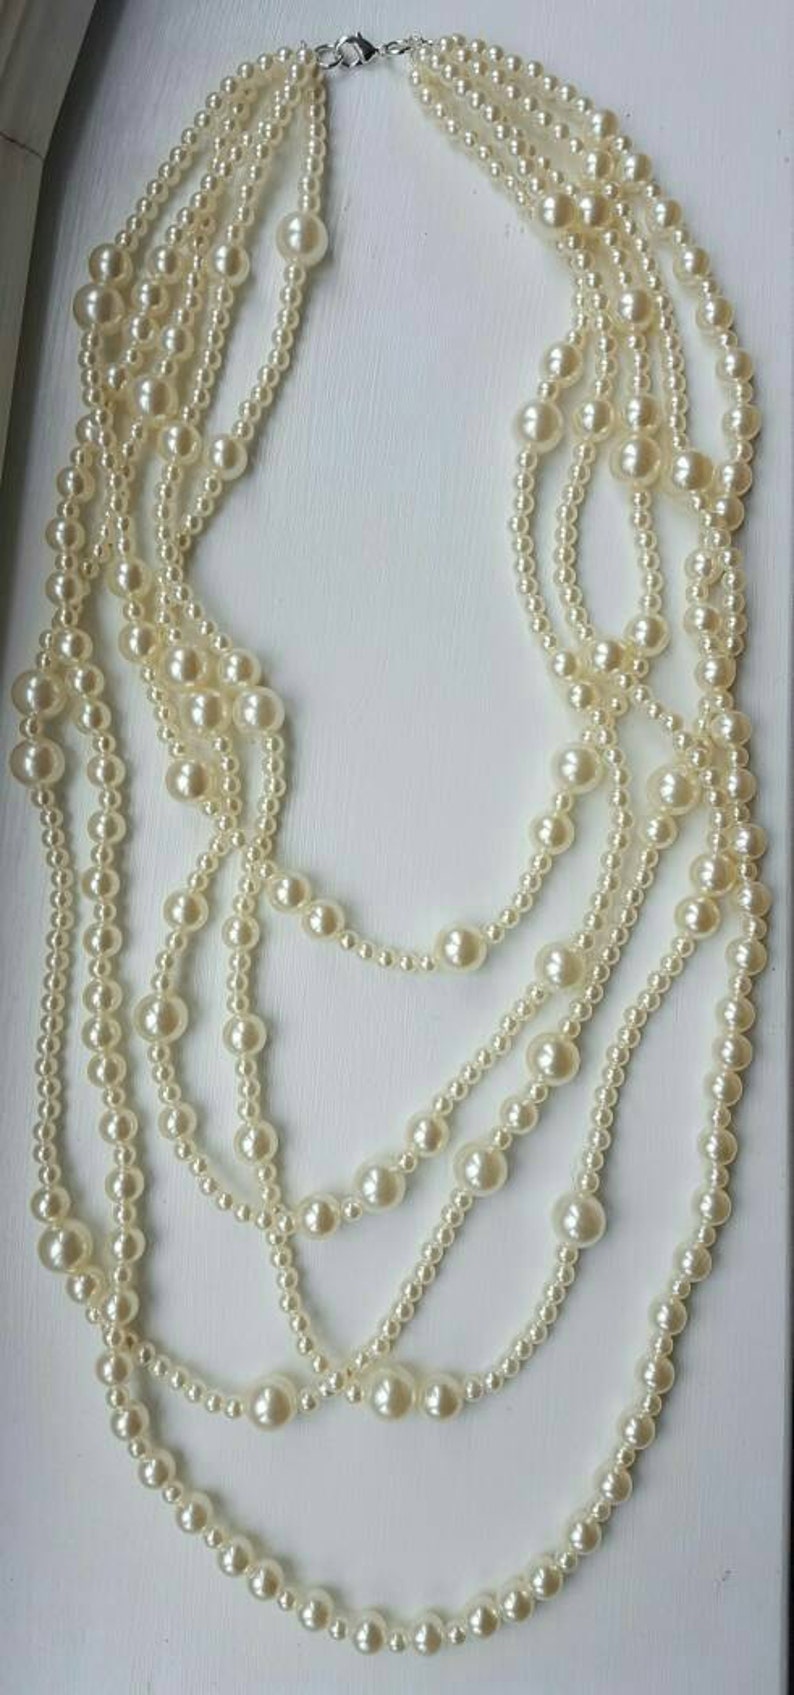 Long multistrand pearl necklace 2017 necklace trend 34 inch | Etsy